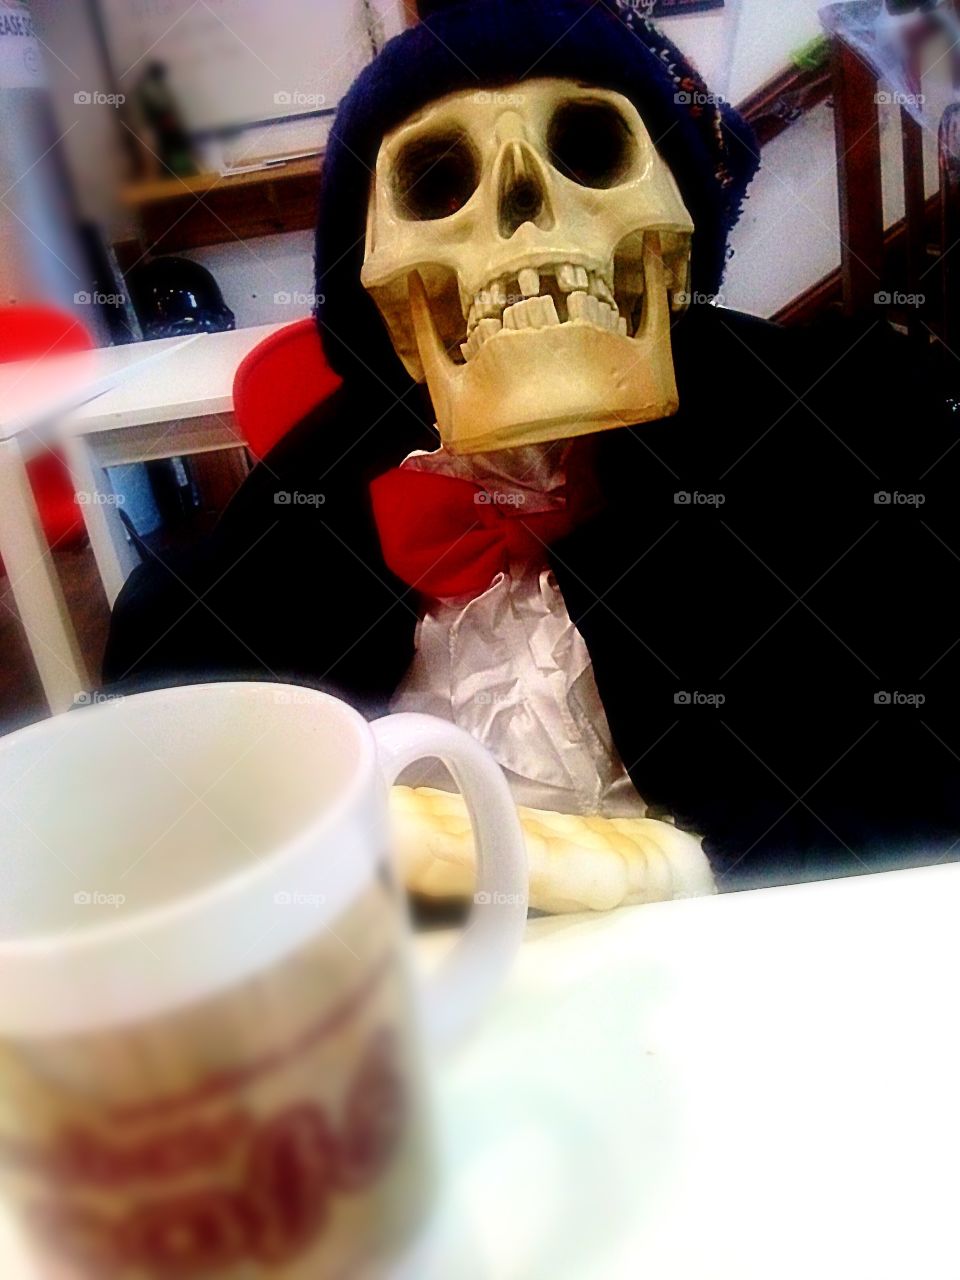 Tea with a skeleton . Halloween display in a cafe. A skeleton sat at the table with a brew.